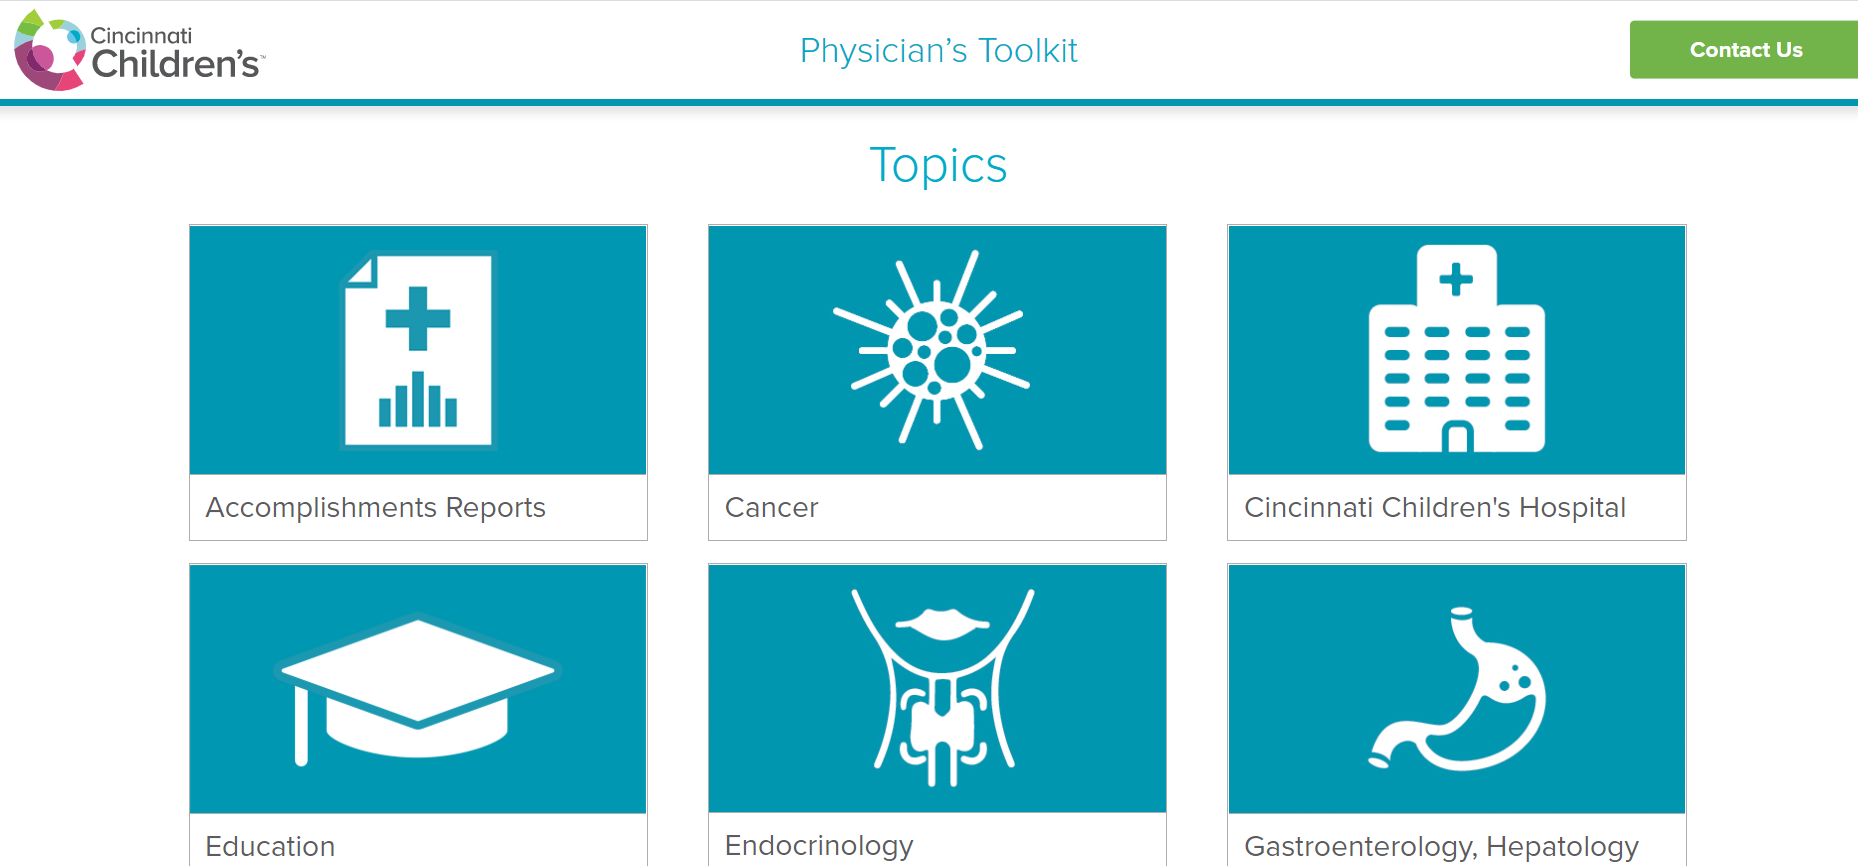 Access our Physician's Toolkit